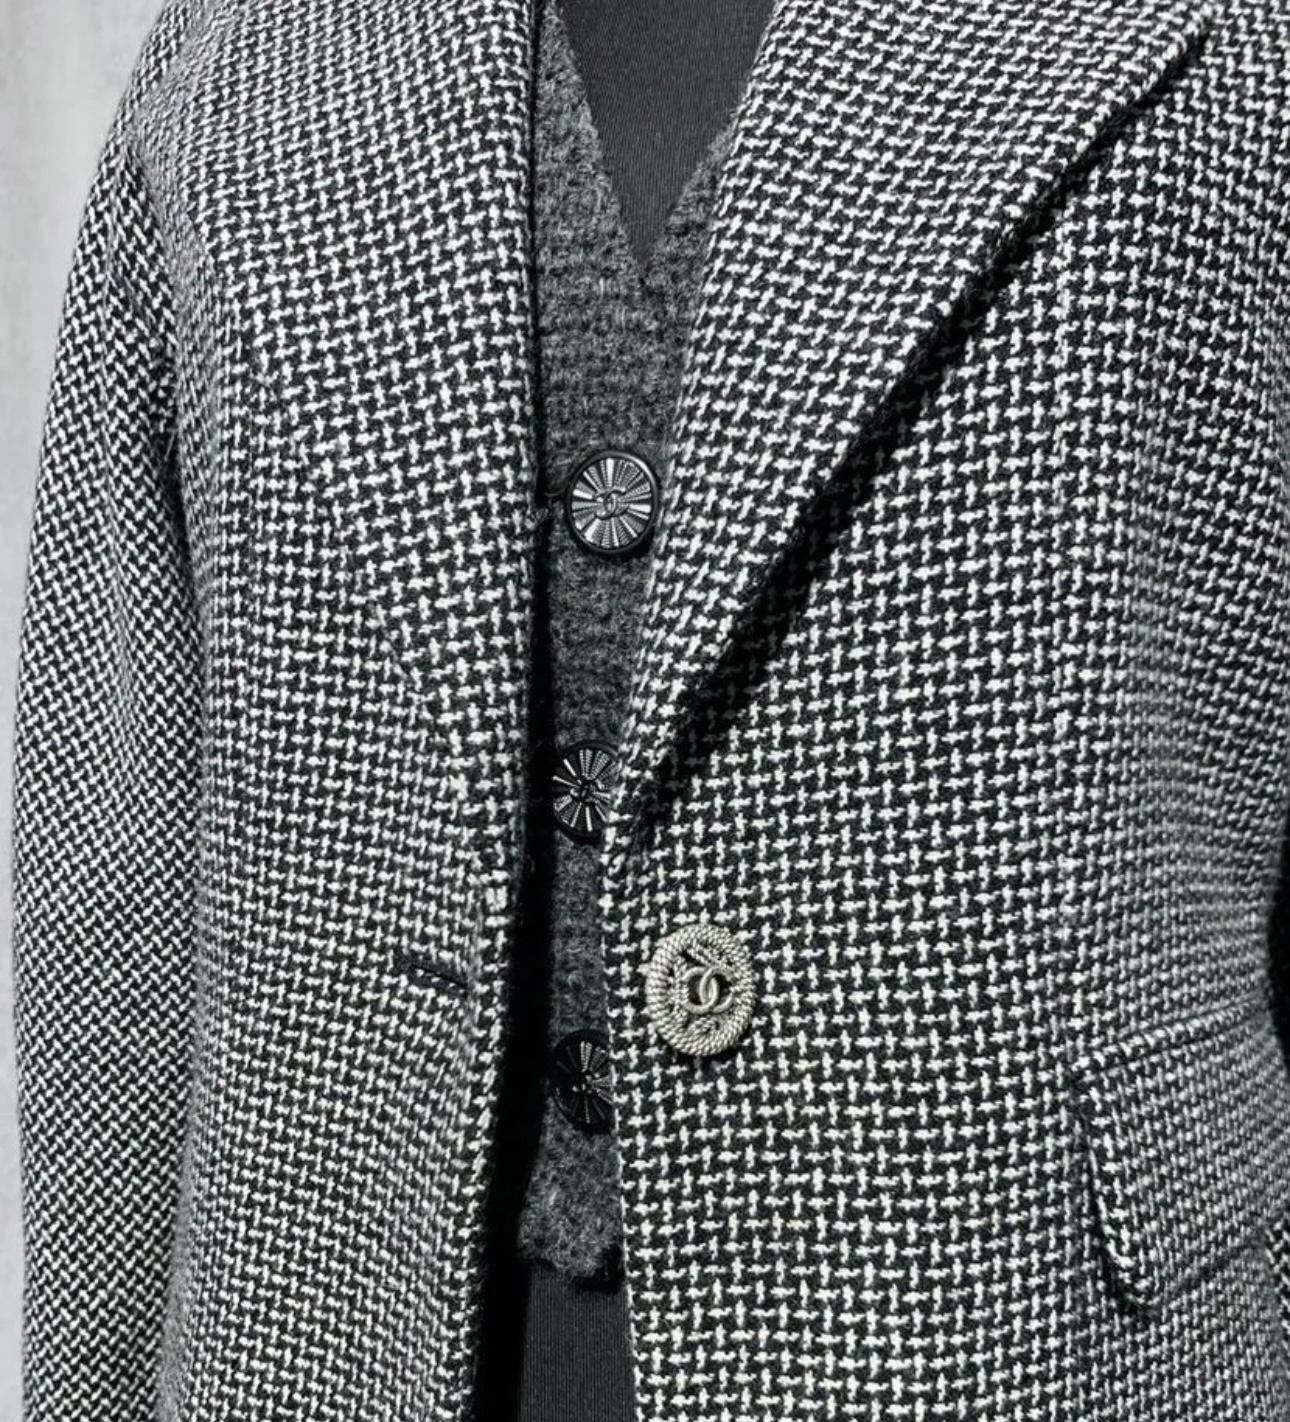 New Chanel timeless black tweed jacket with CC logo buttons at front and cuffs.
- tonal silk lining with camellias
Please note: vest is not included, it's for sale separately
Size mark of the jacket 36 FR. Never worn.